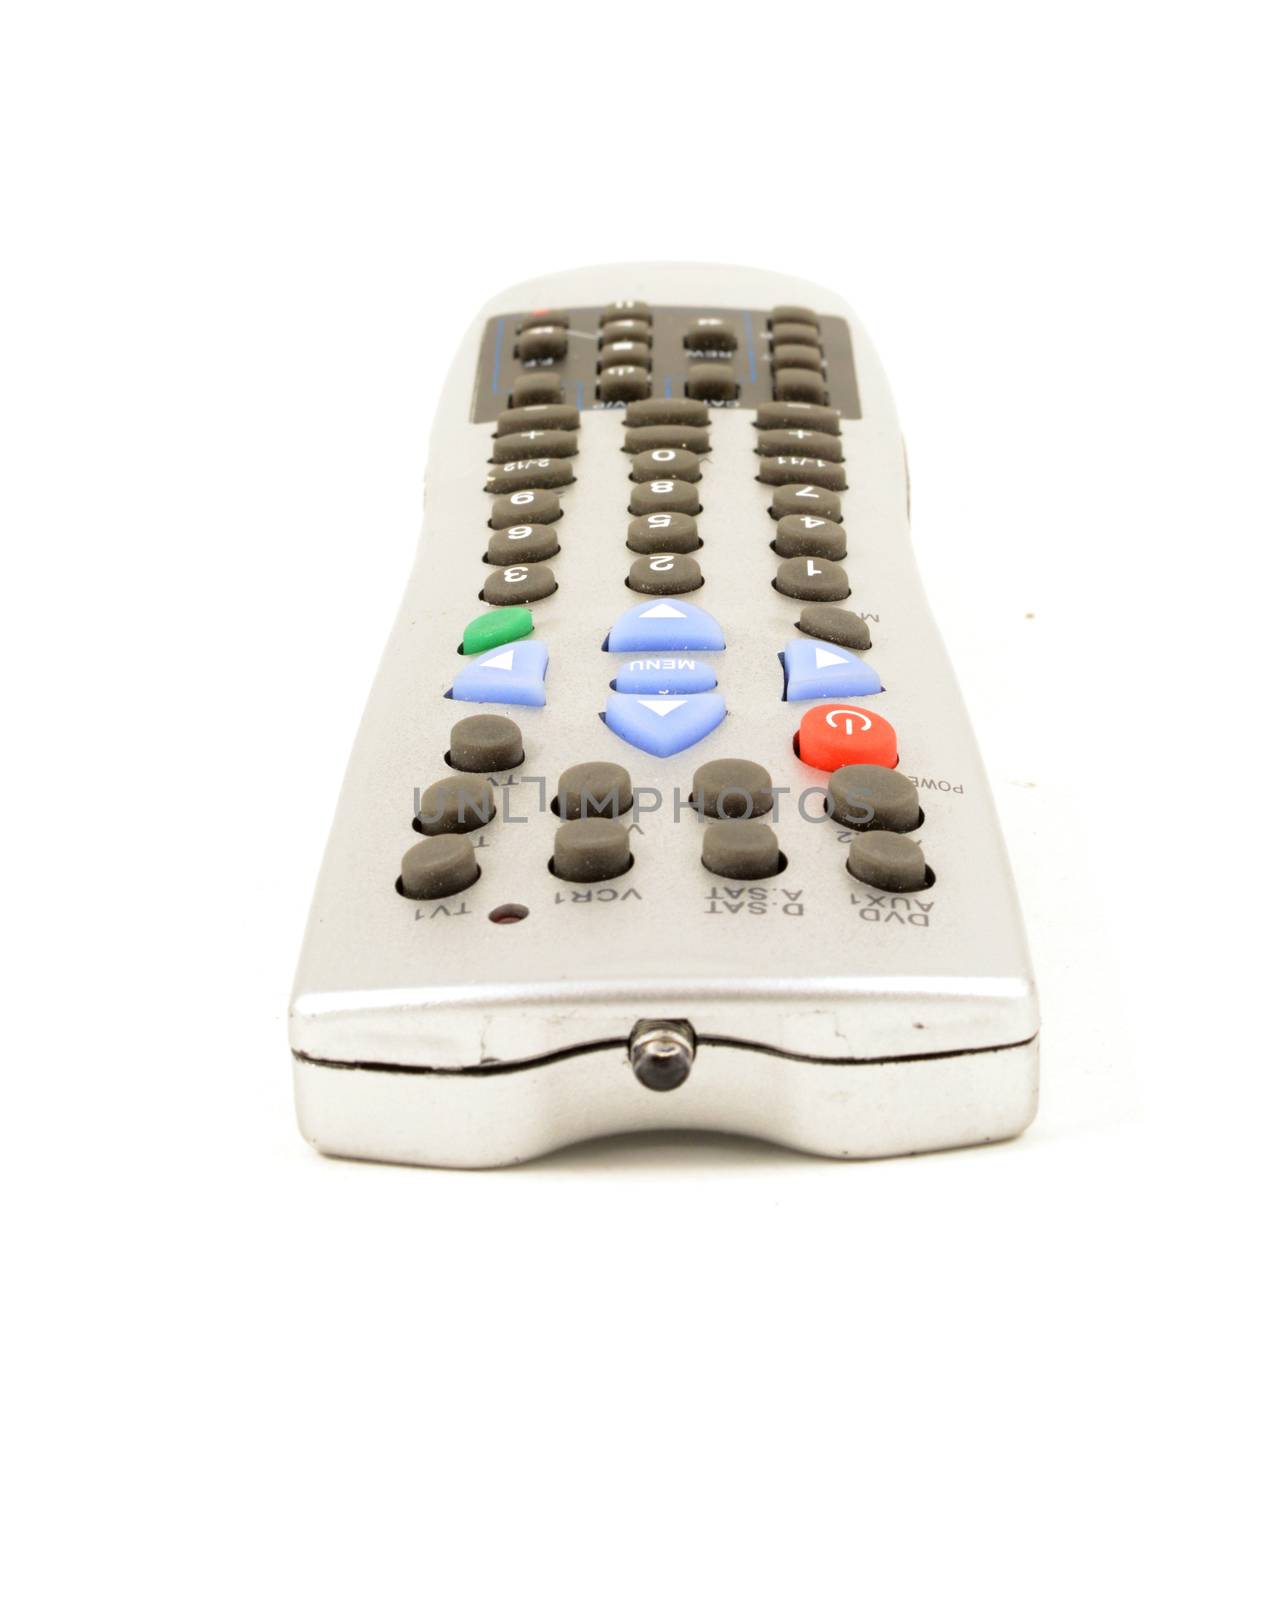 An isolated over white background image of a Universal remote controller for multiple digital devices.